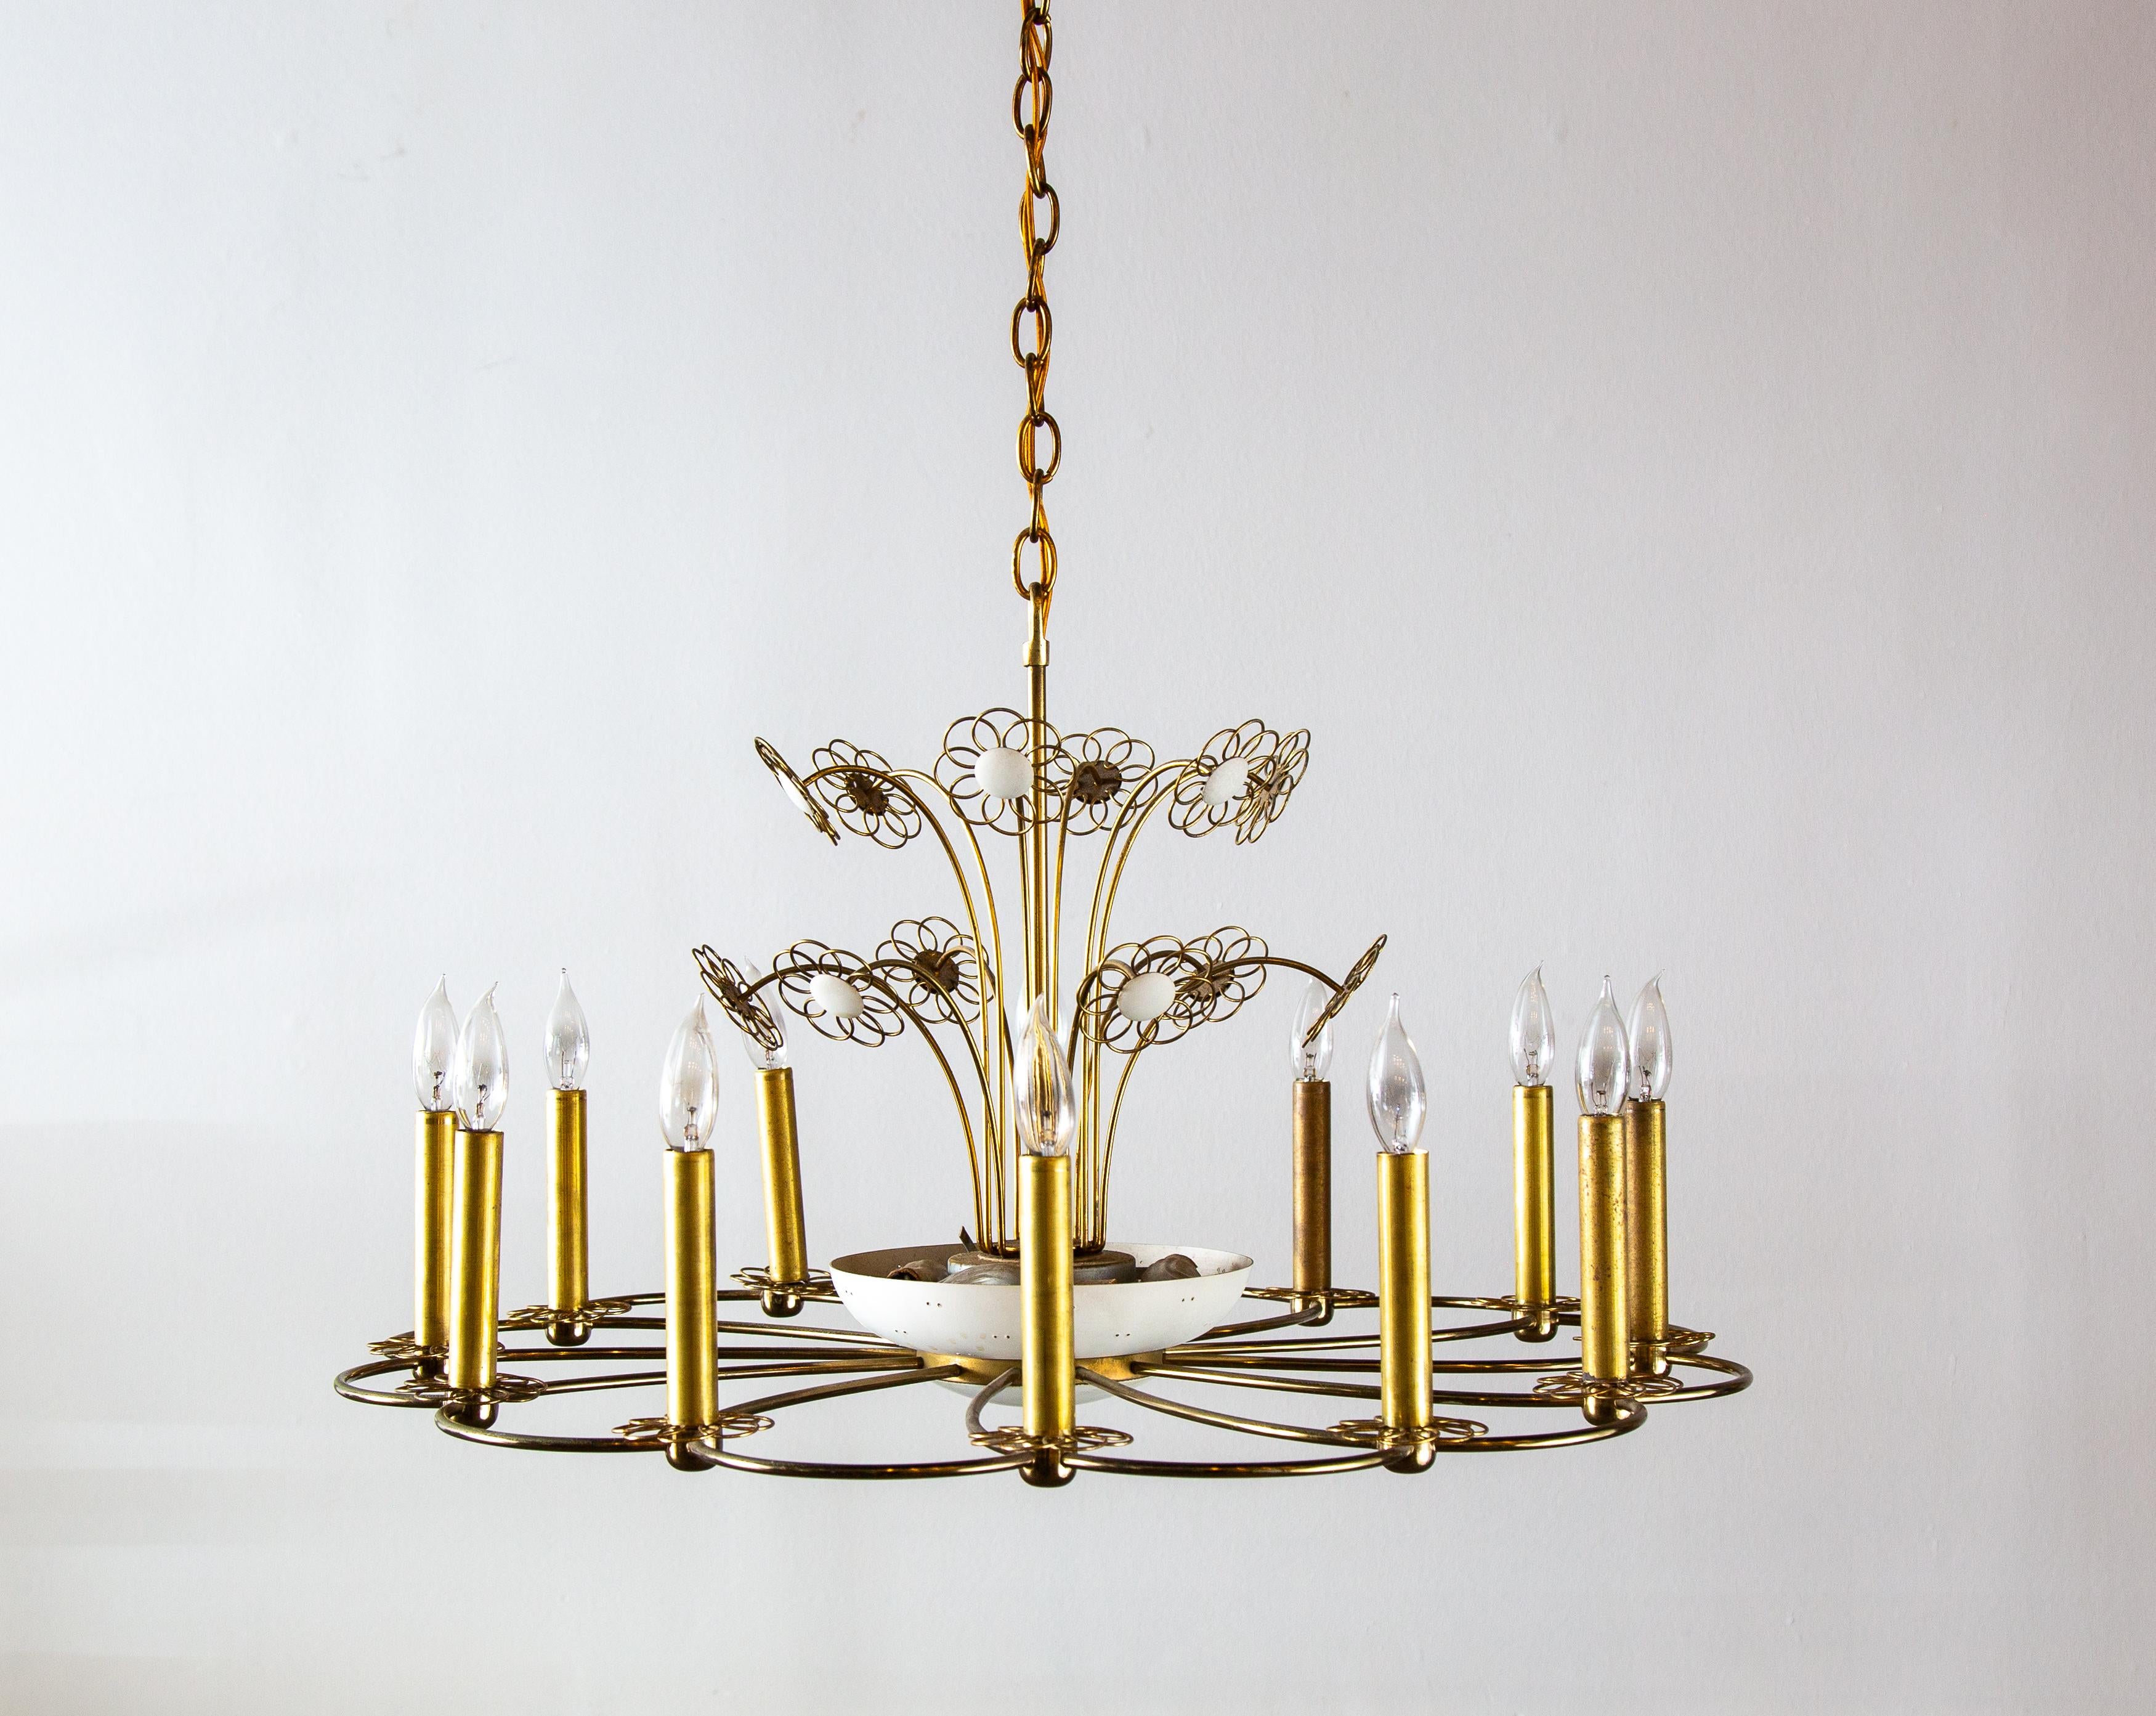 A 1960s chandelier designed by Paavo Tynell for Lightolier. 12 Candelabra bulbs around the circumference accentuated with brass wire flowerlets at the bottom of each. From underneath the brass frame features a swirling pattern.  The center includes